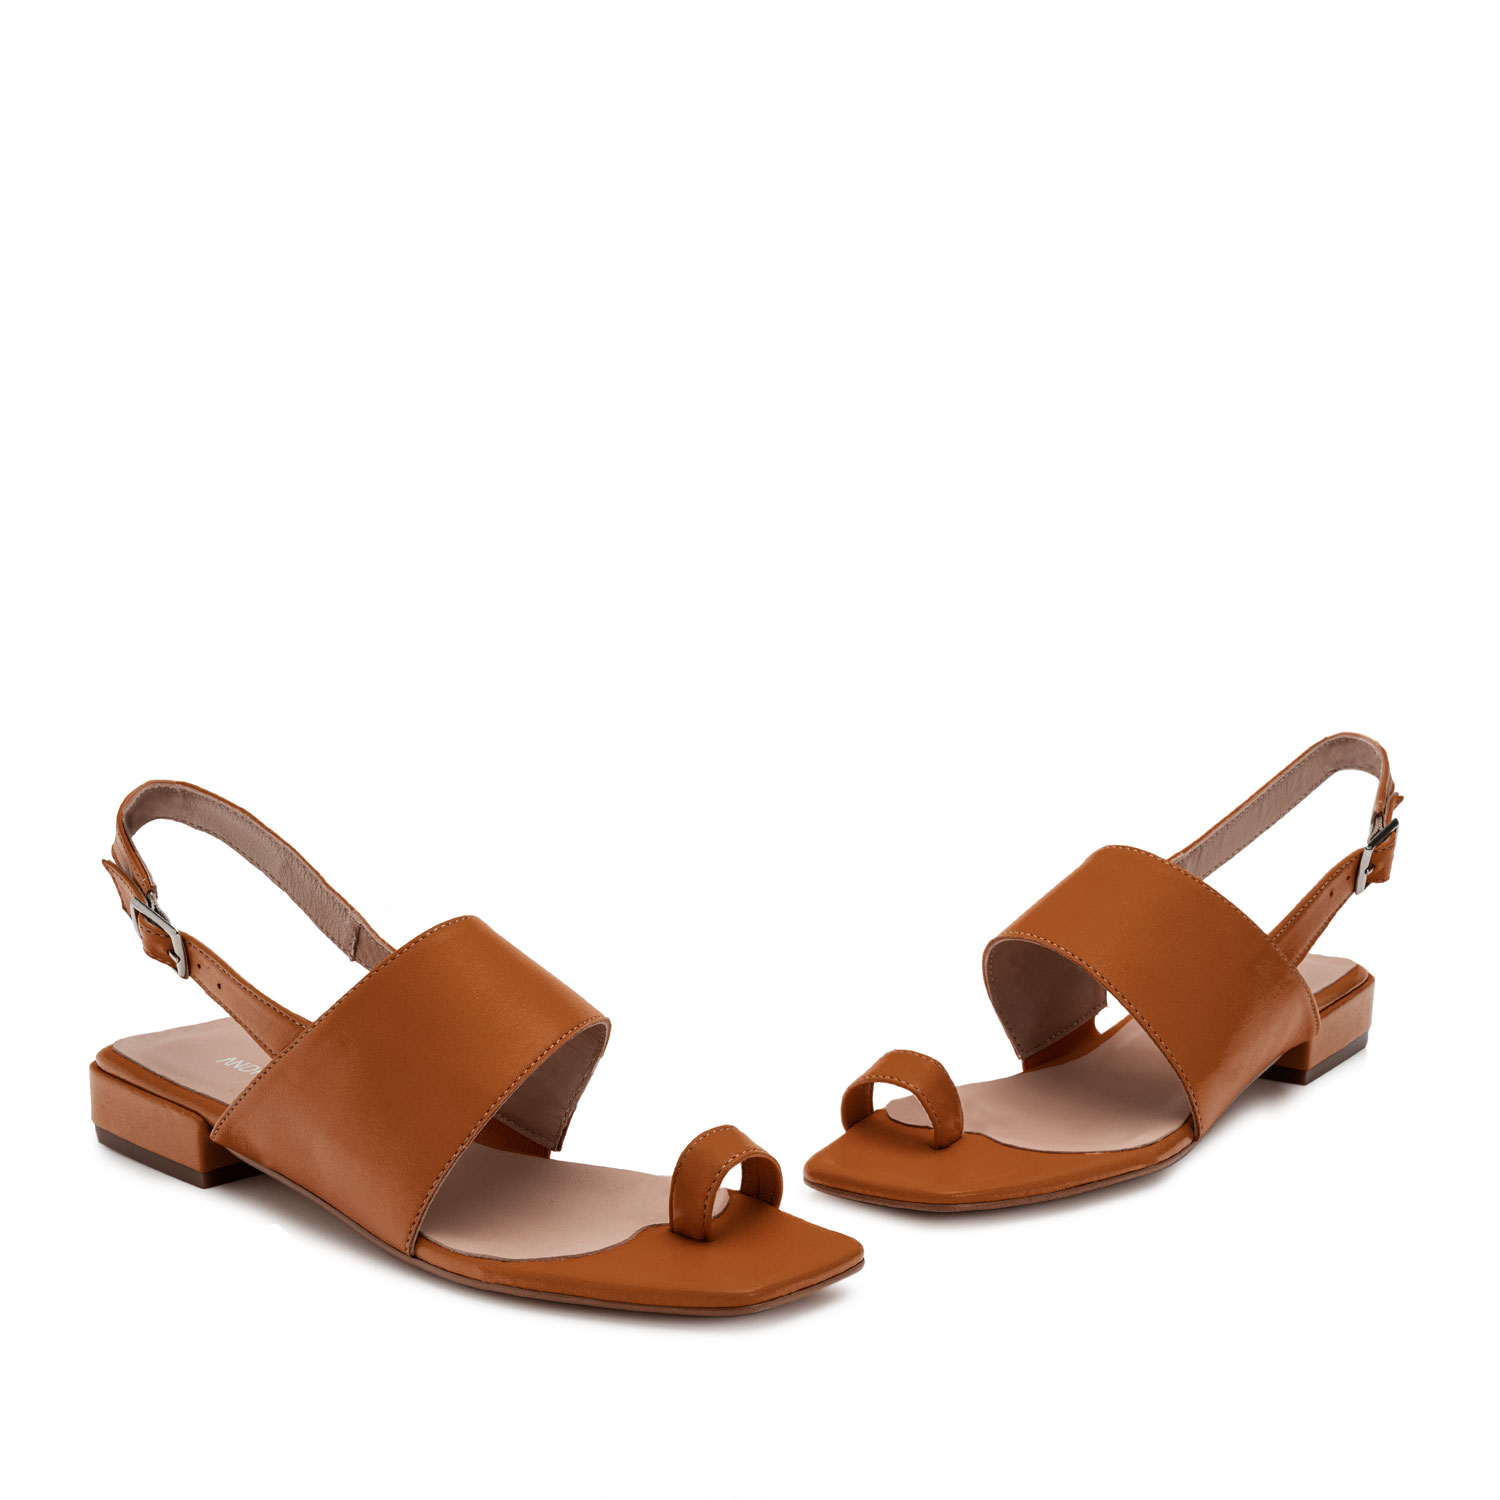 Toe Slingback Sandals in Brown Leather